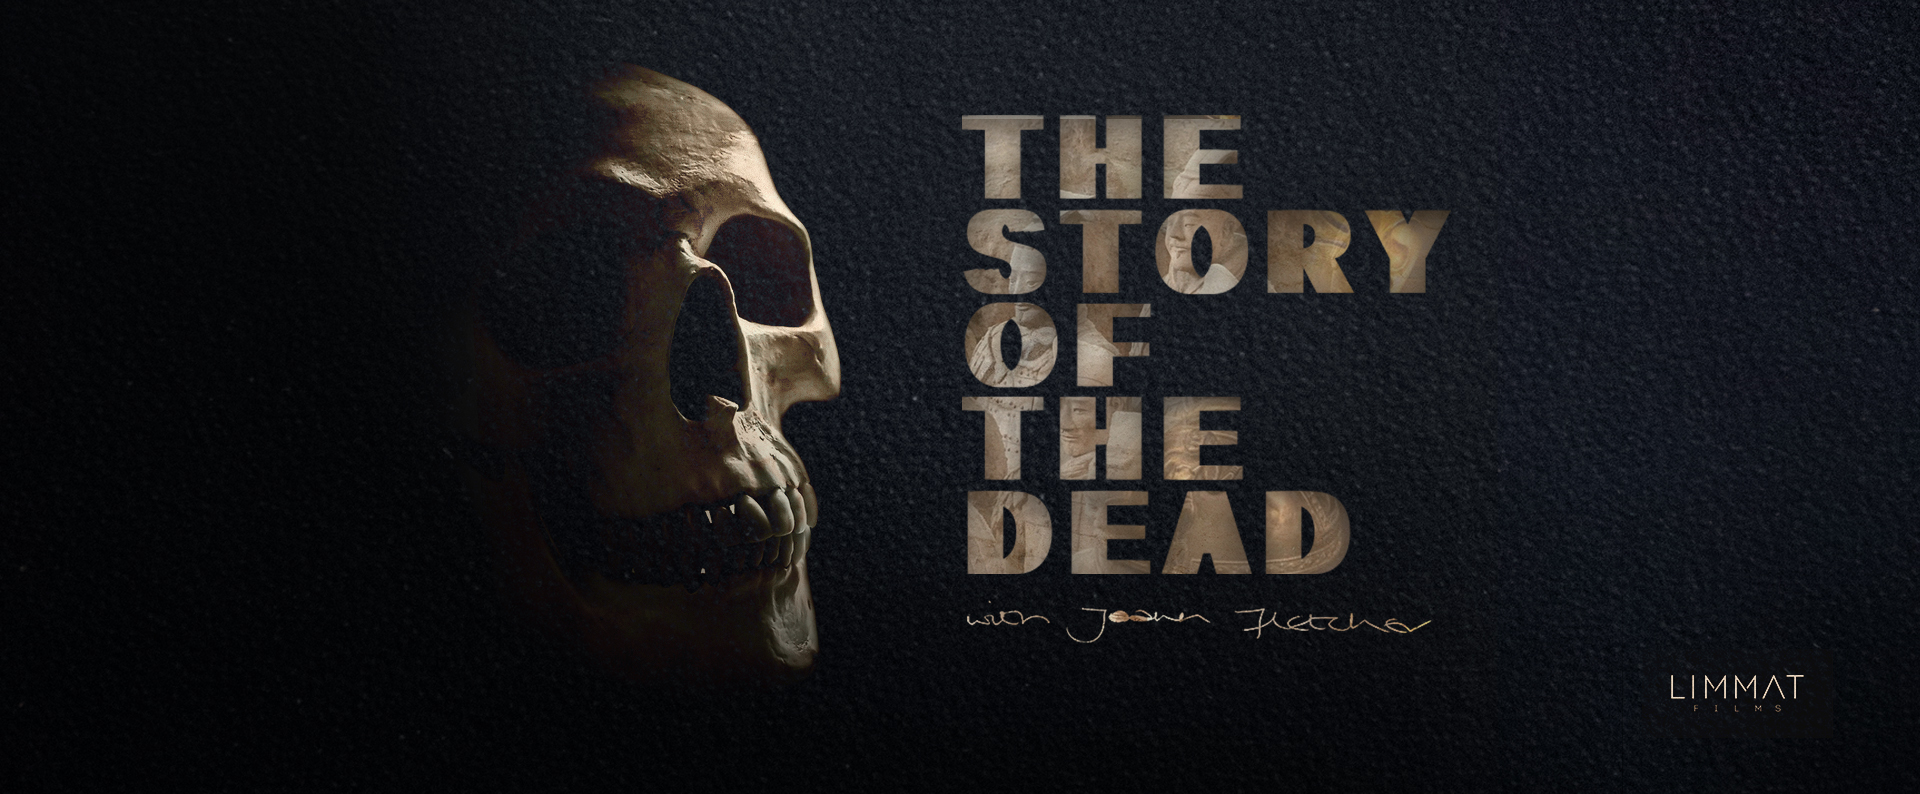 The Story Of The Dead